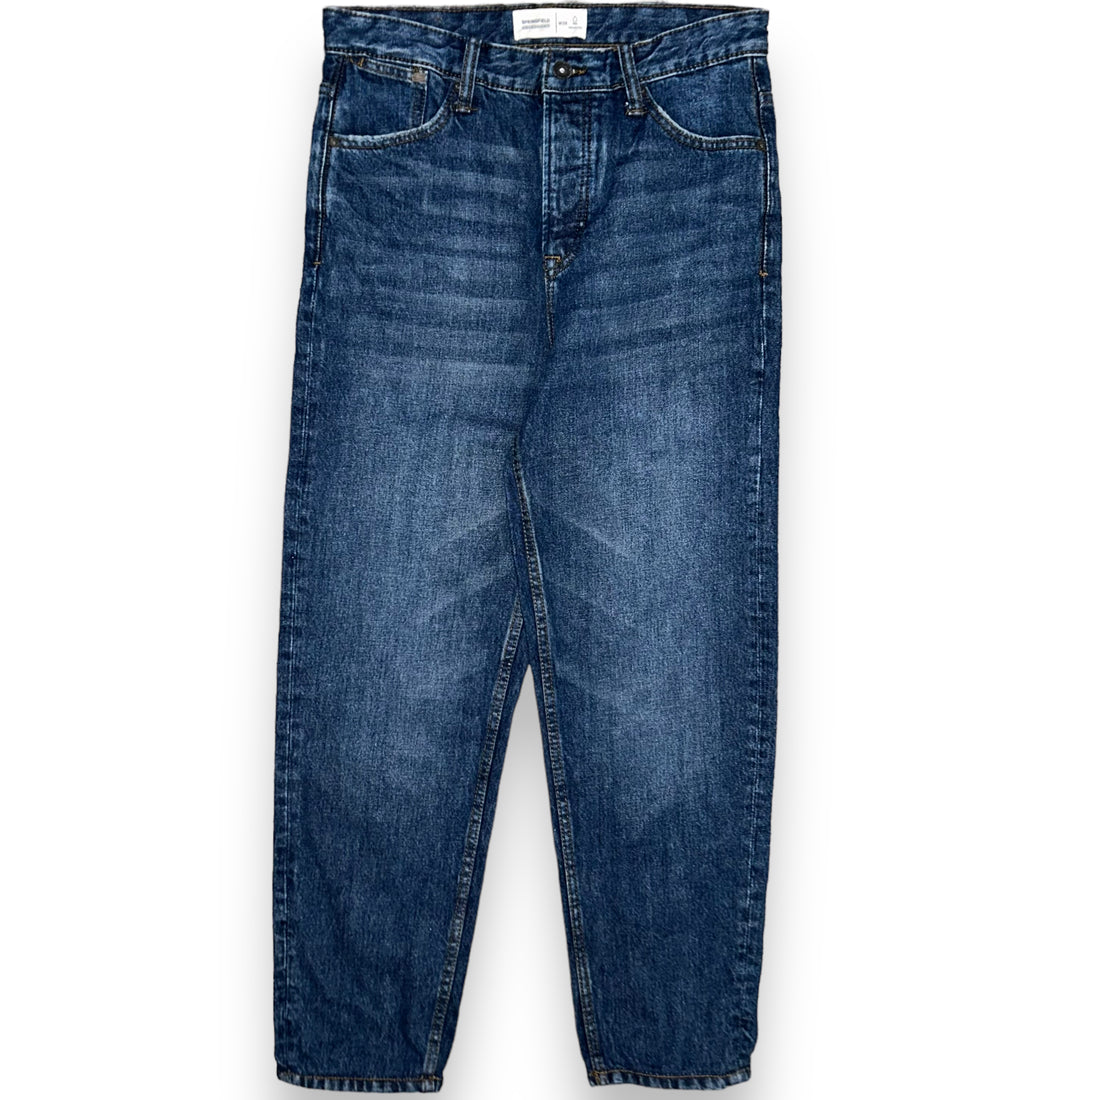 Springfield jeans (30 US S)